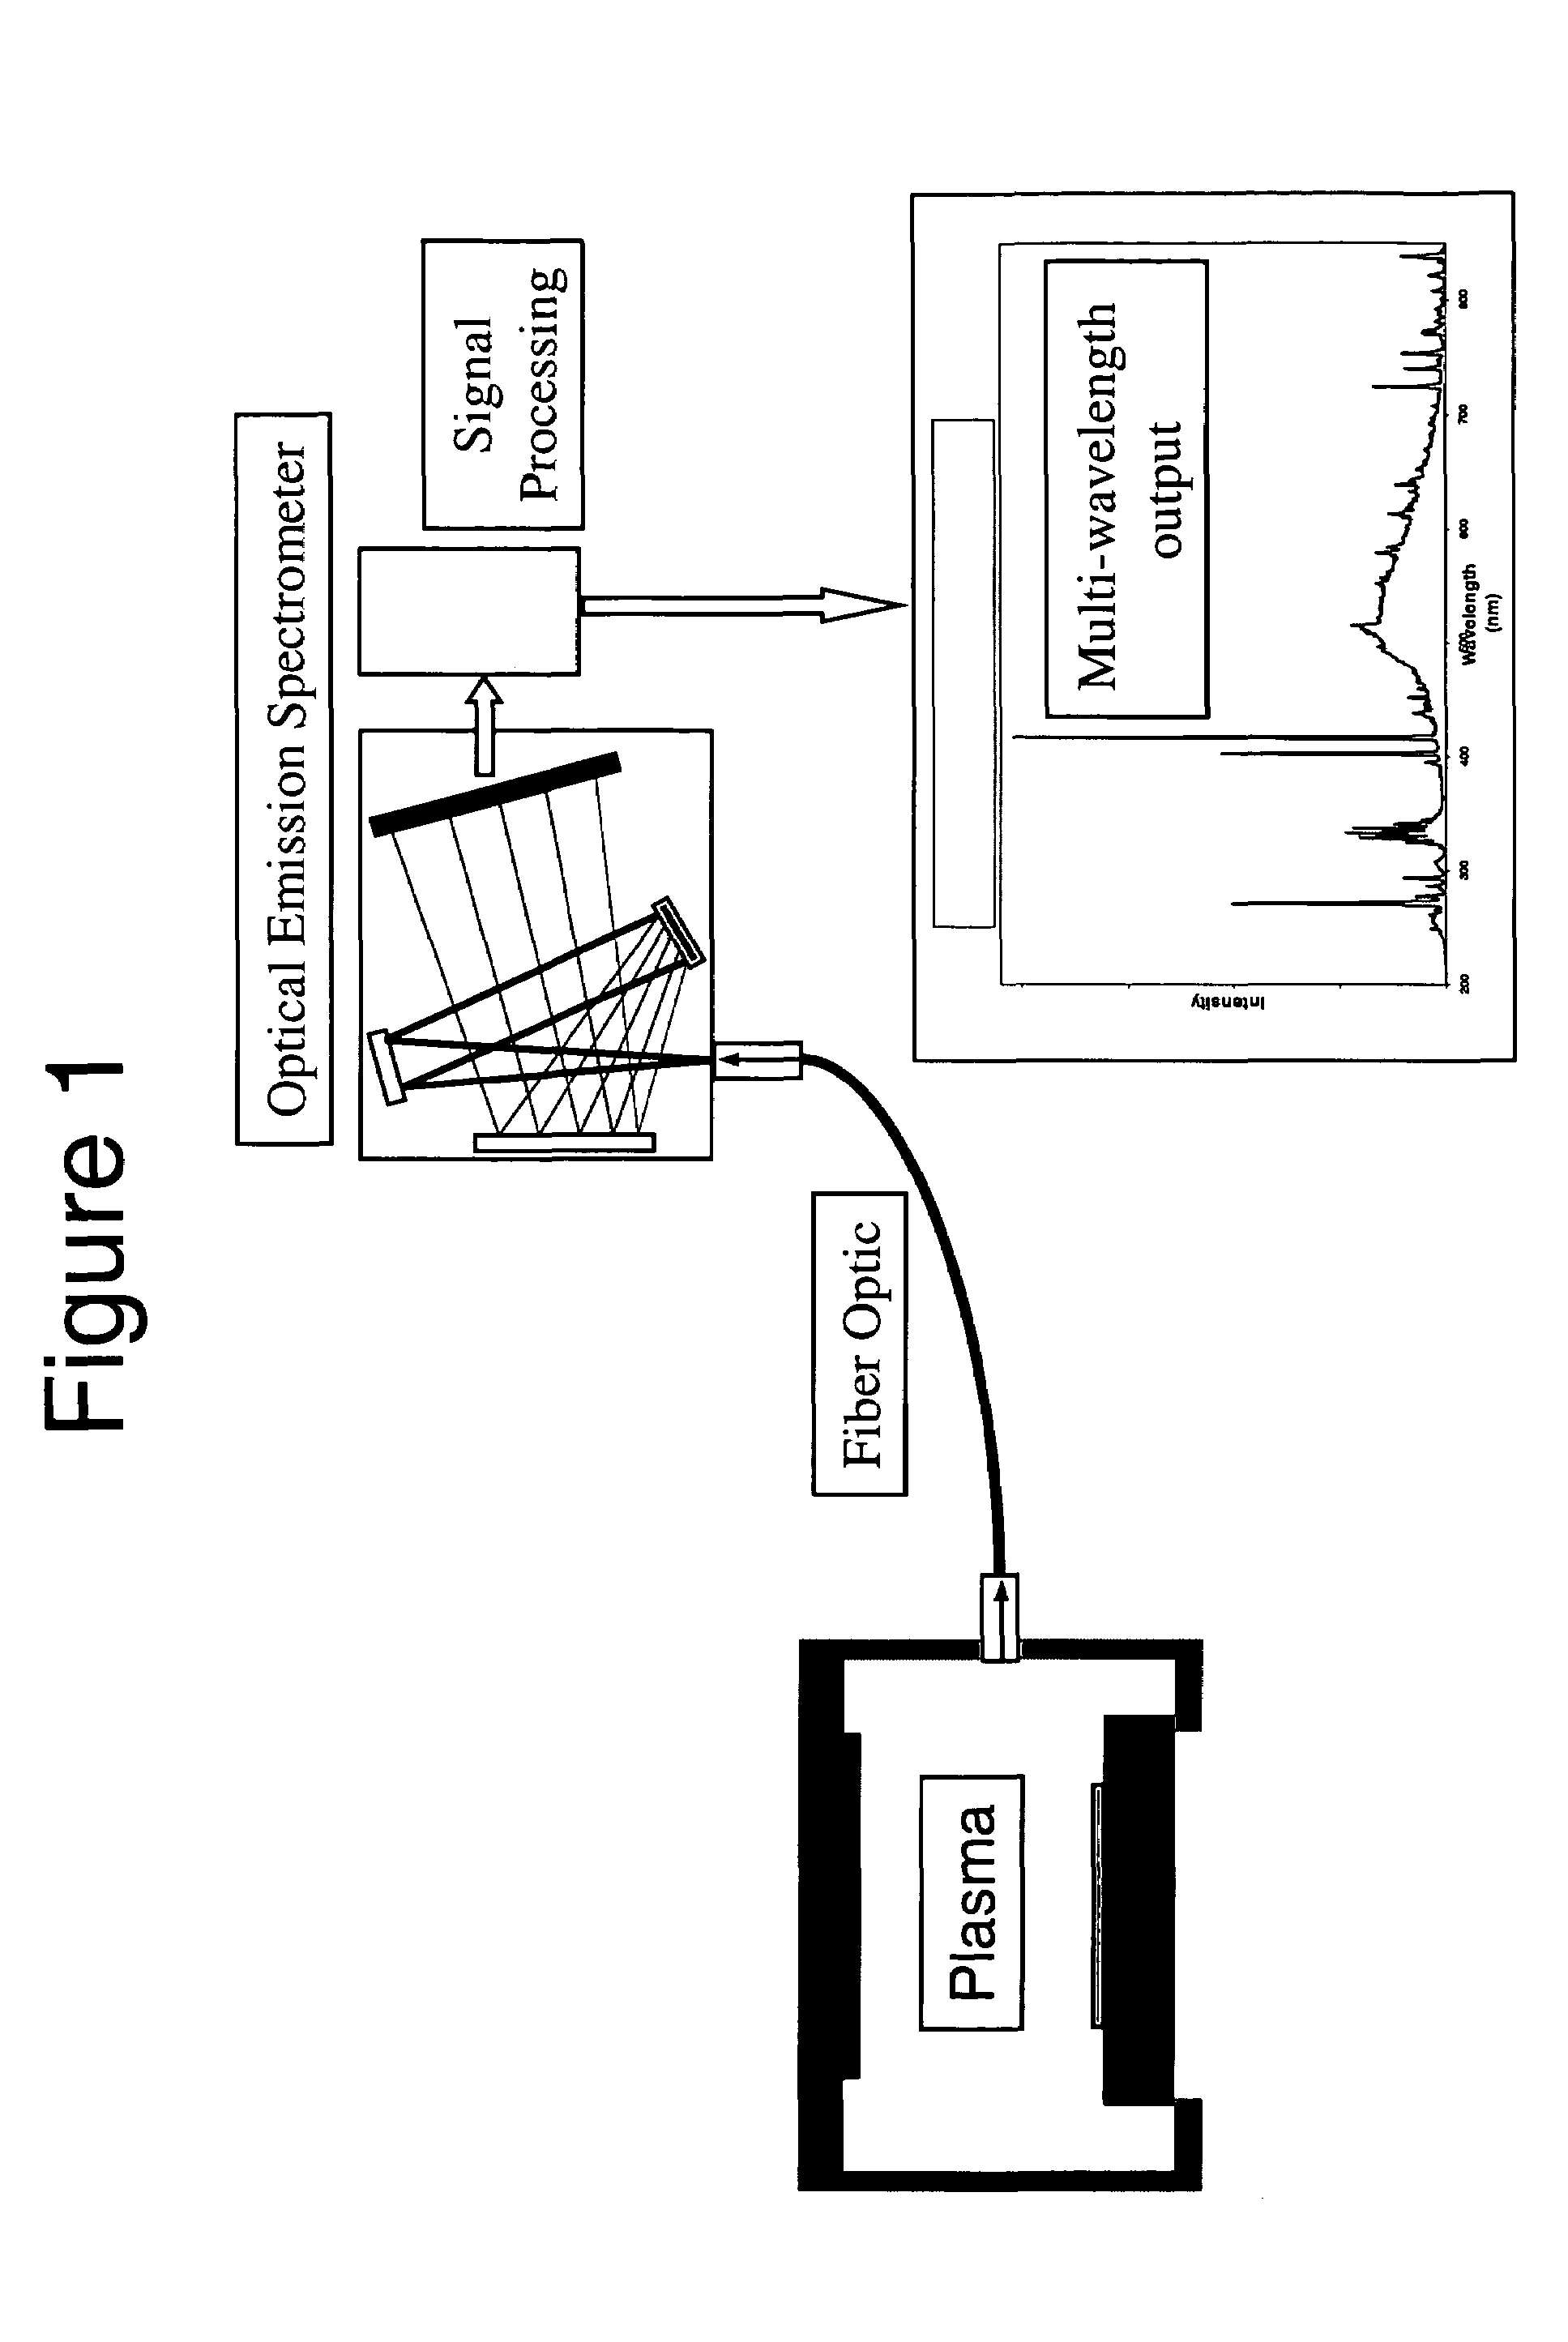 Envelope follower end point detection in time division multiplexed processes